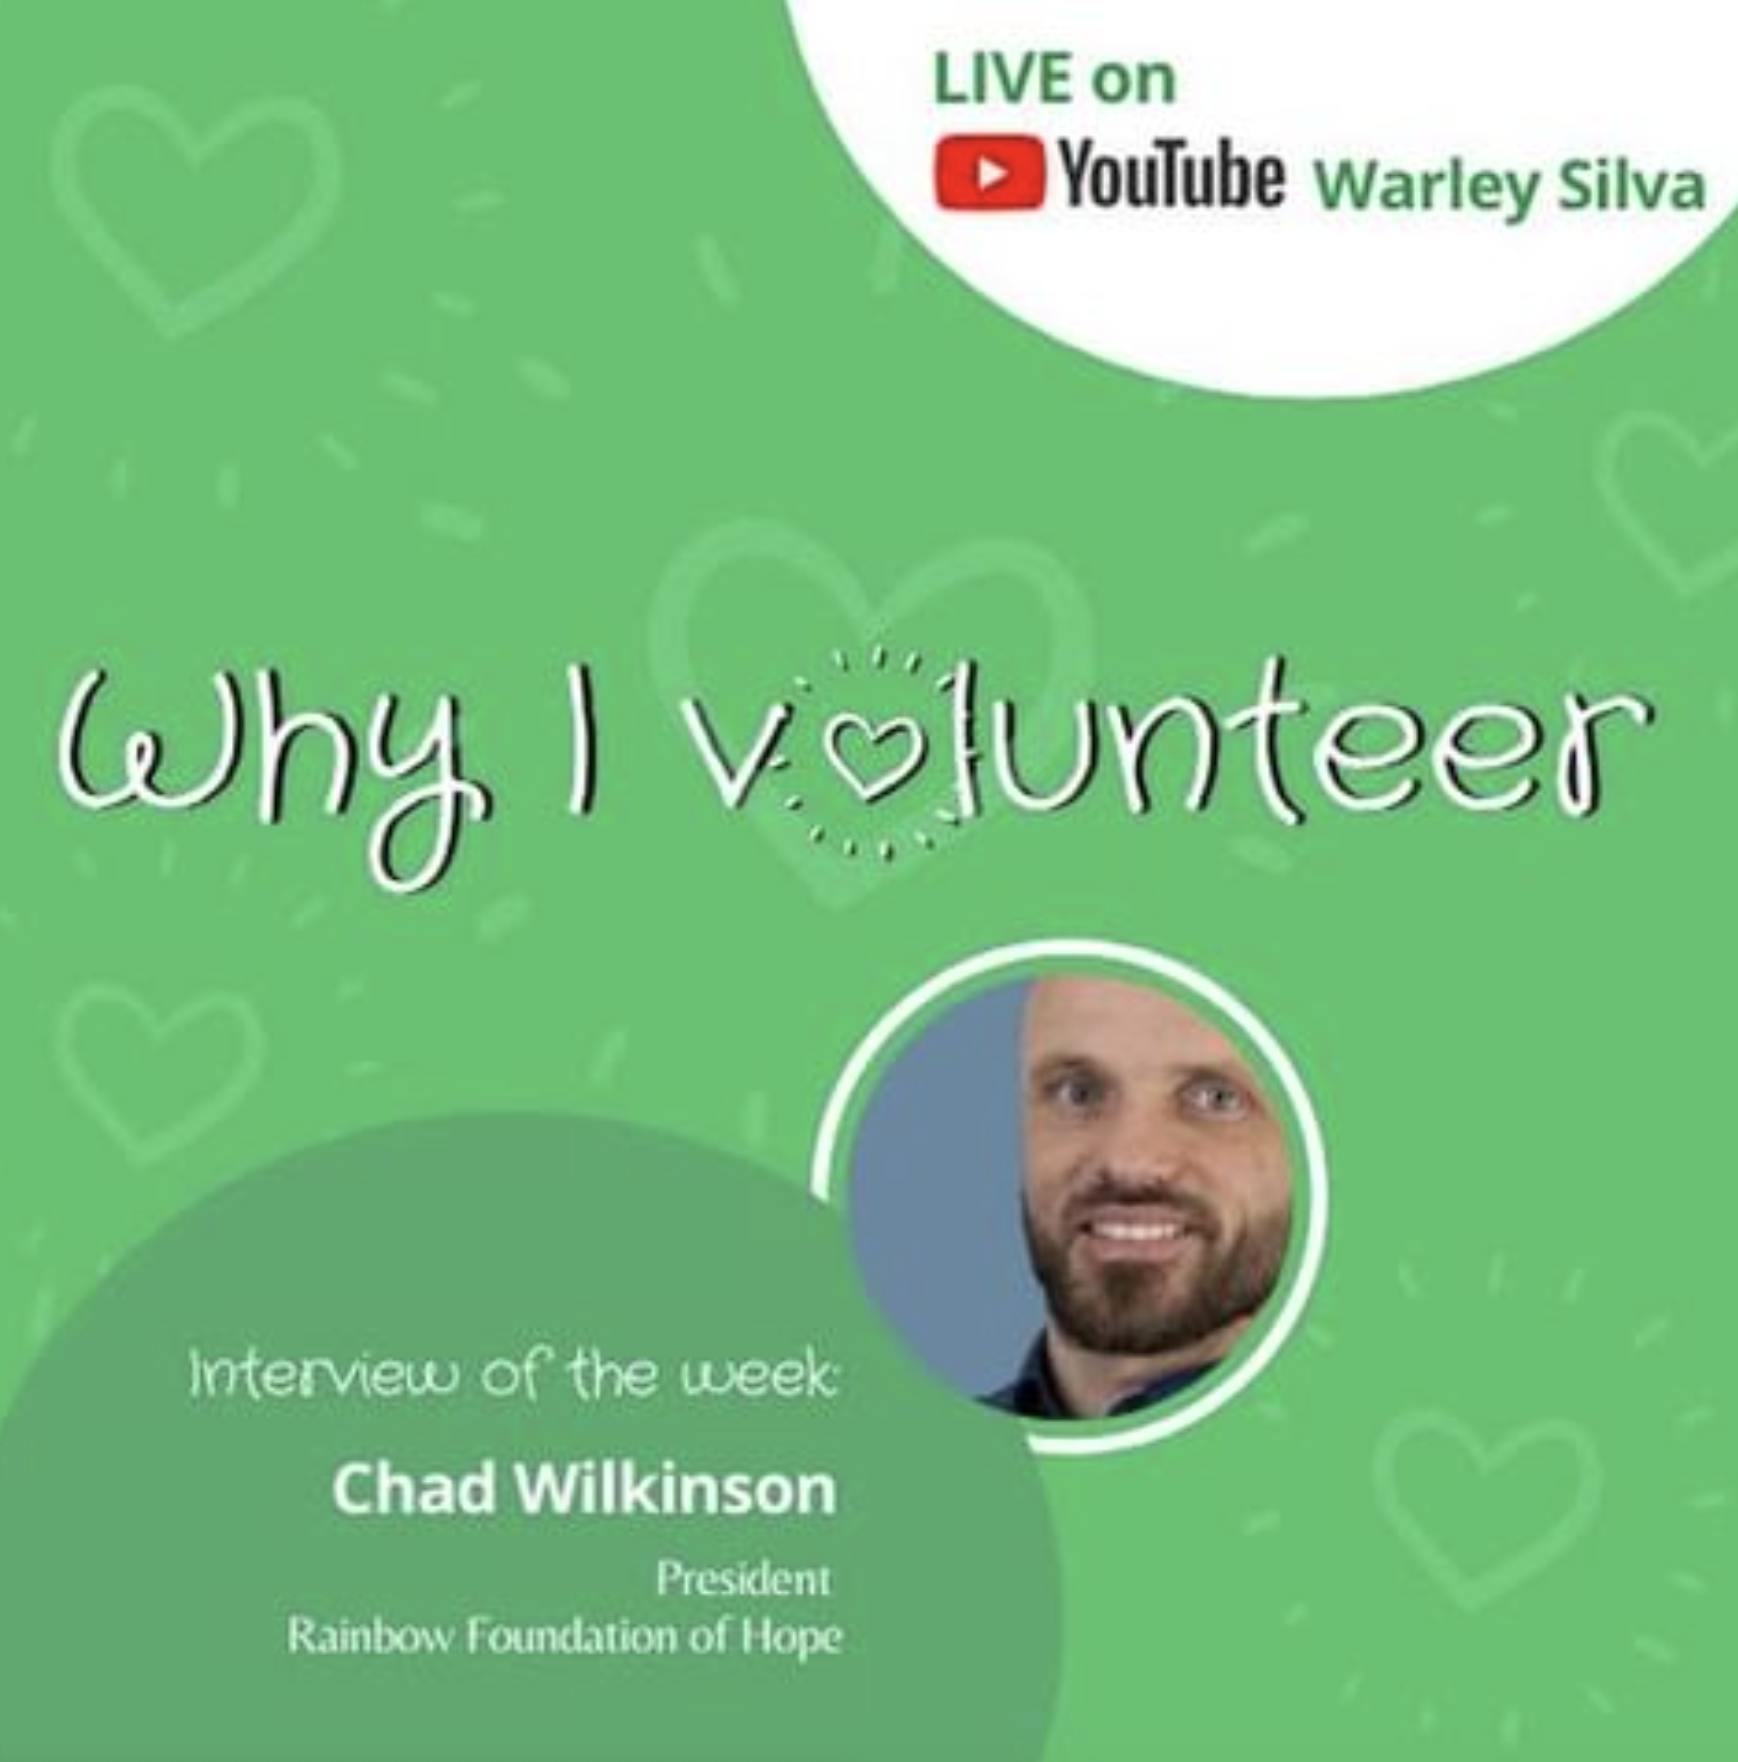 Meet our Co-Founder, Chad Wilkinson, and learn why he volunteers! 